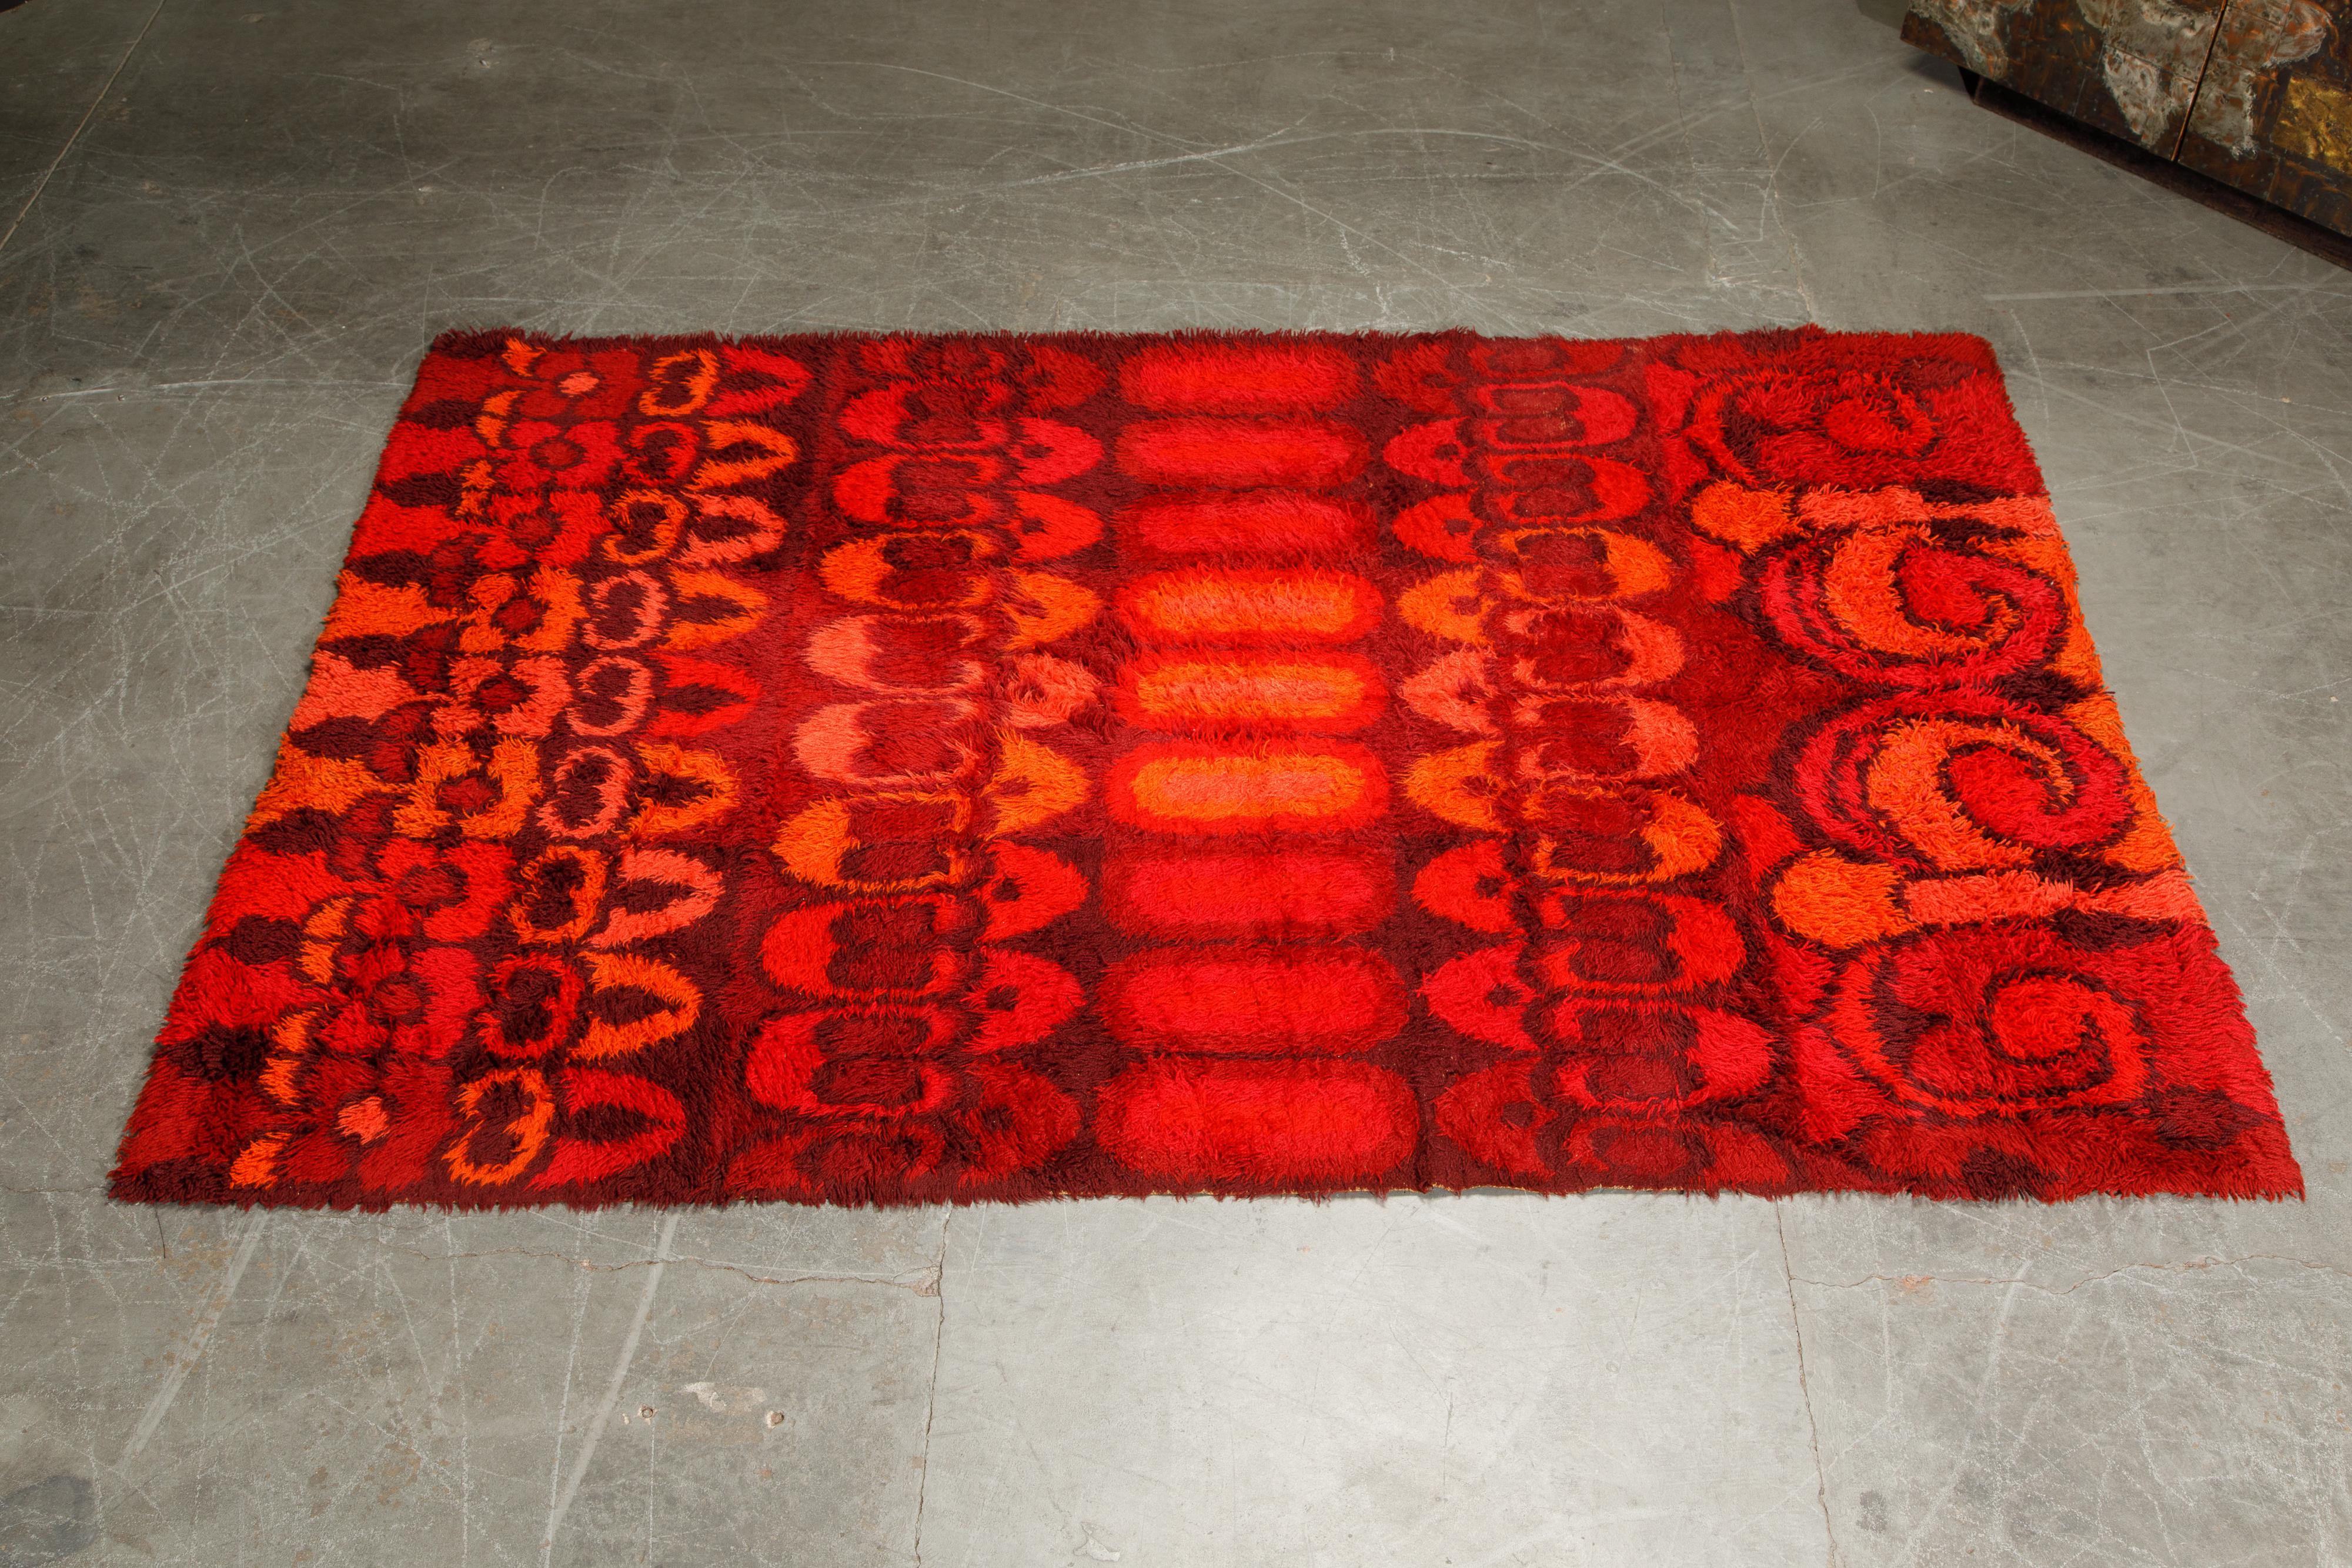 Vibrant colors and inspiring geometric pattern in this 1960s shag rug by Rya, Finland. Deep shades of red in a large room sized area rug able to cover 103